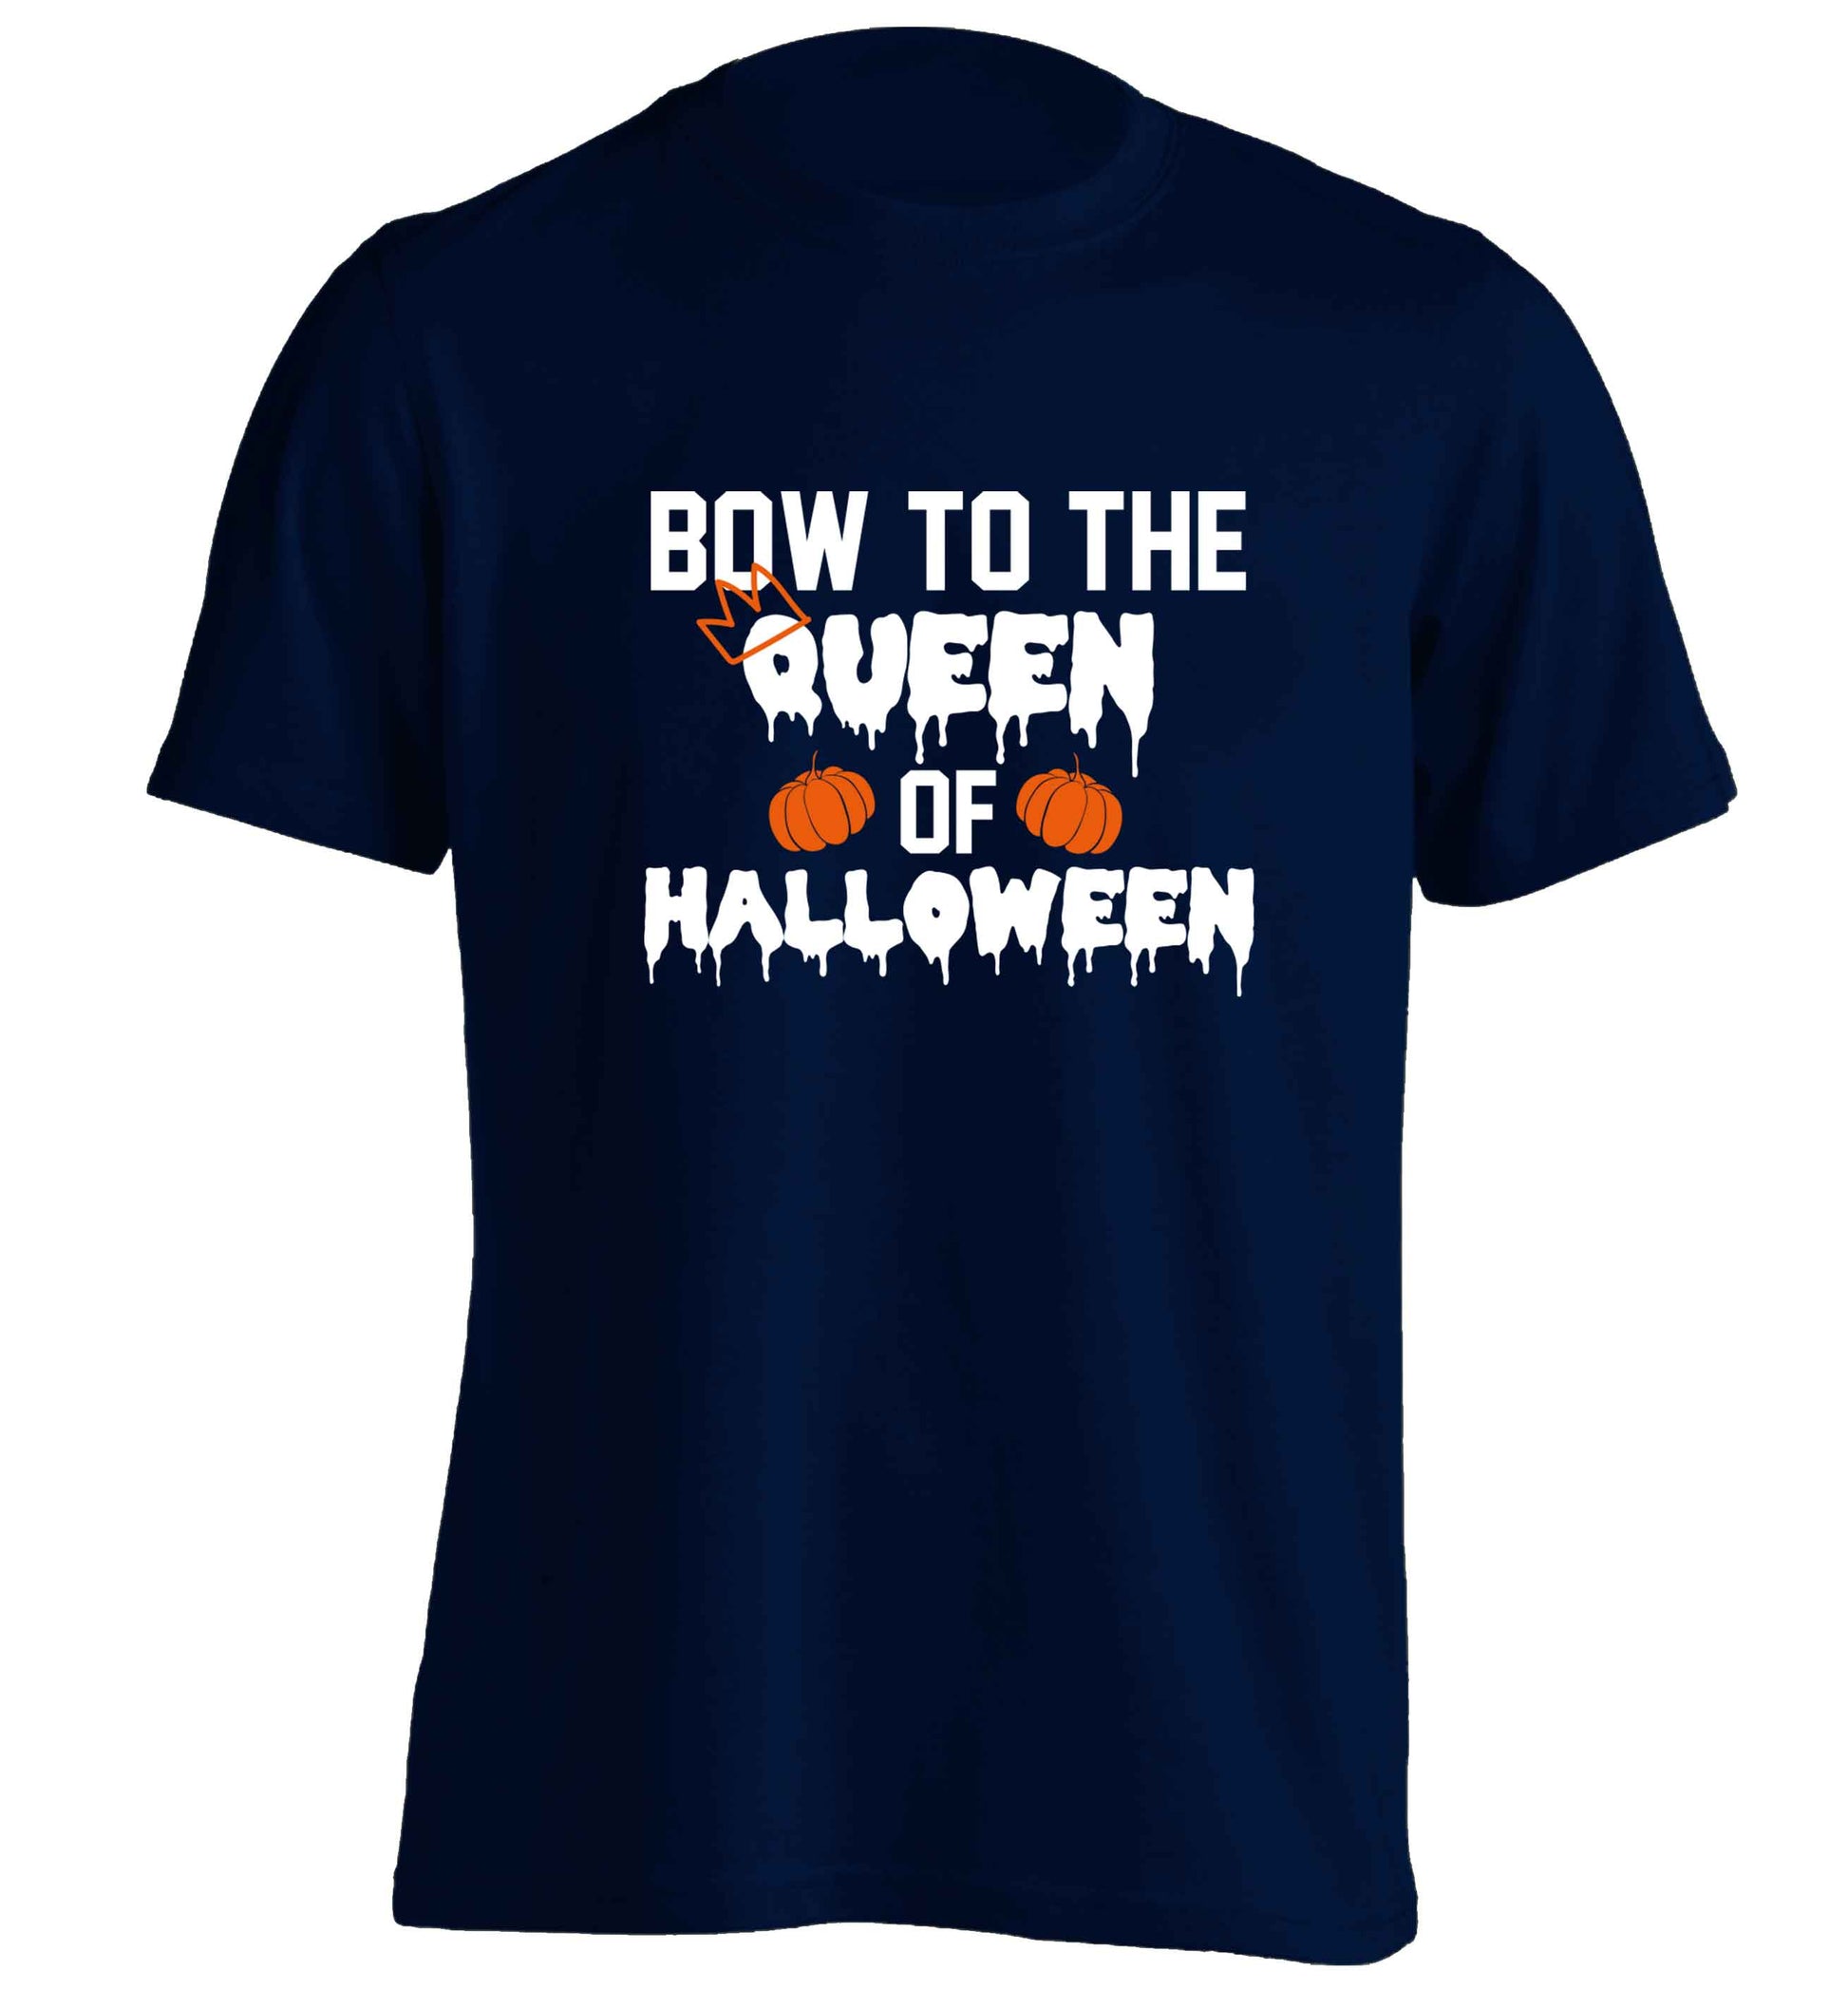 Bow to the Queen of halloween adults unisex navy Tshirt 2XL